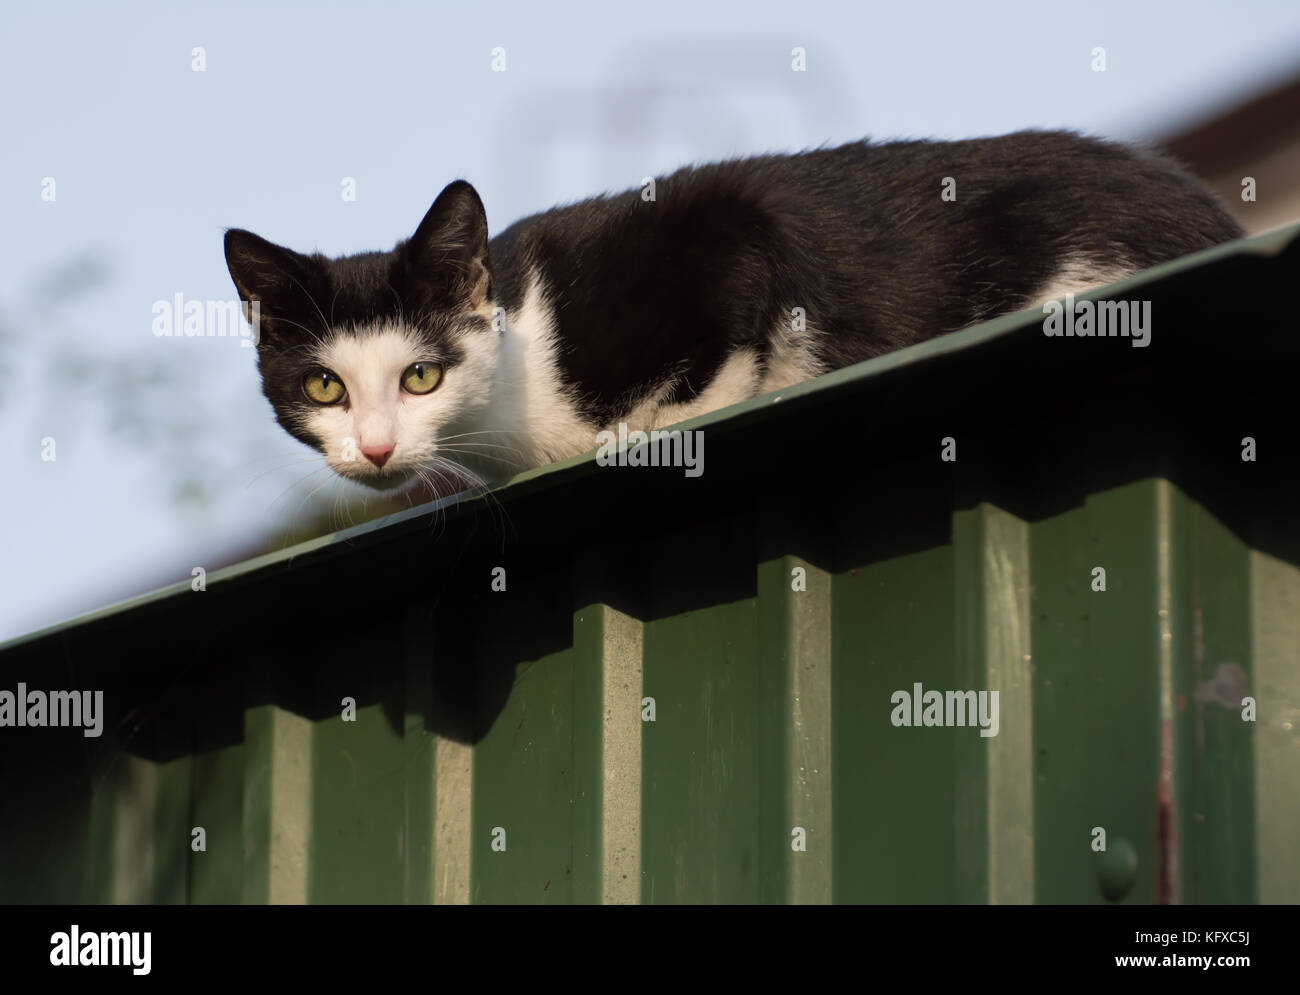 Black and white cat up lurking on a garage roof, looking down towards the camera Stock Photo